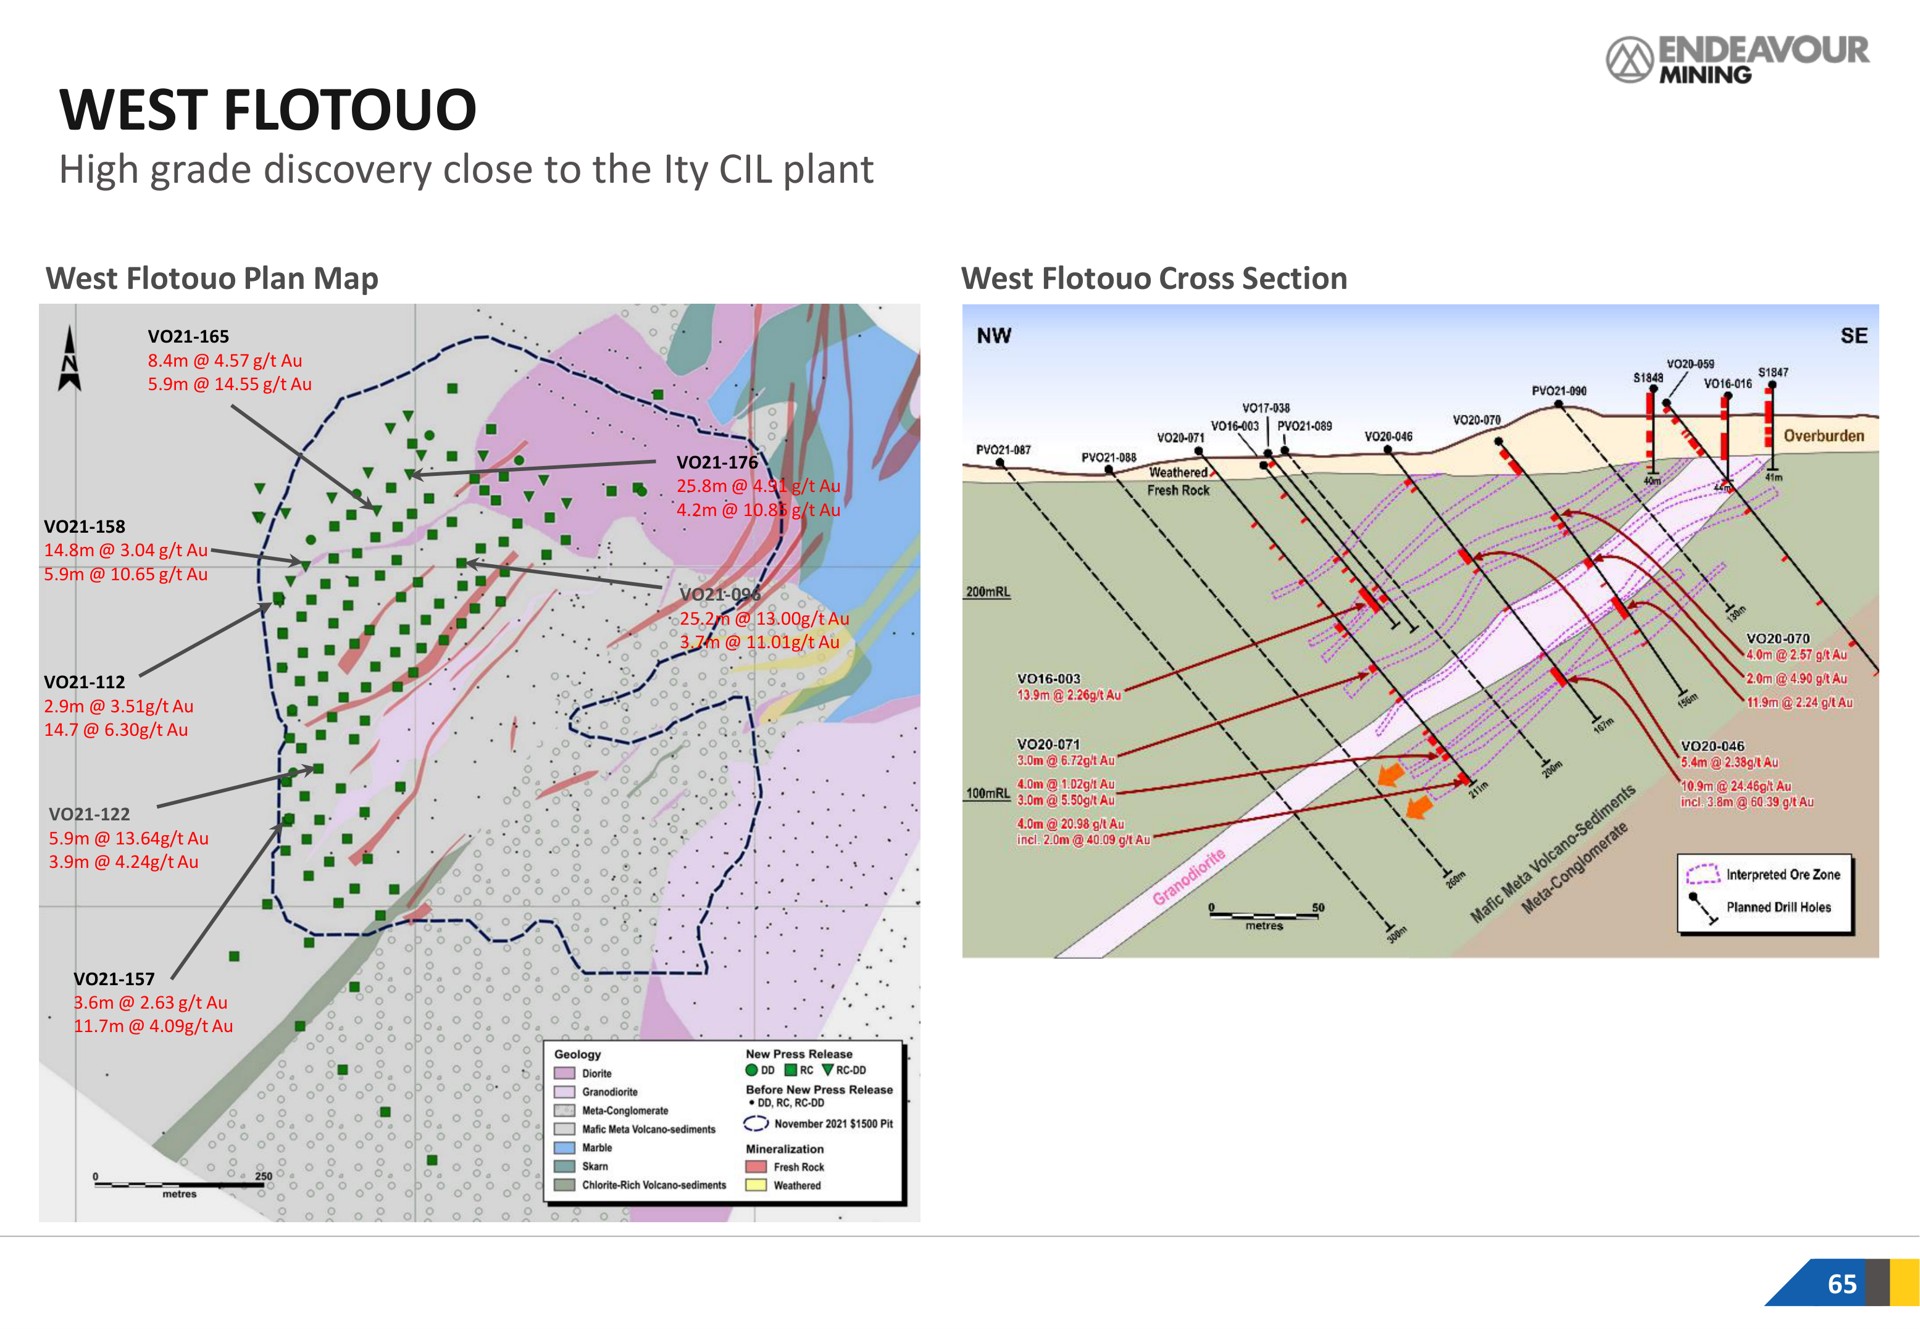 west high grade discovery close to the plant | Endeavour Mining